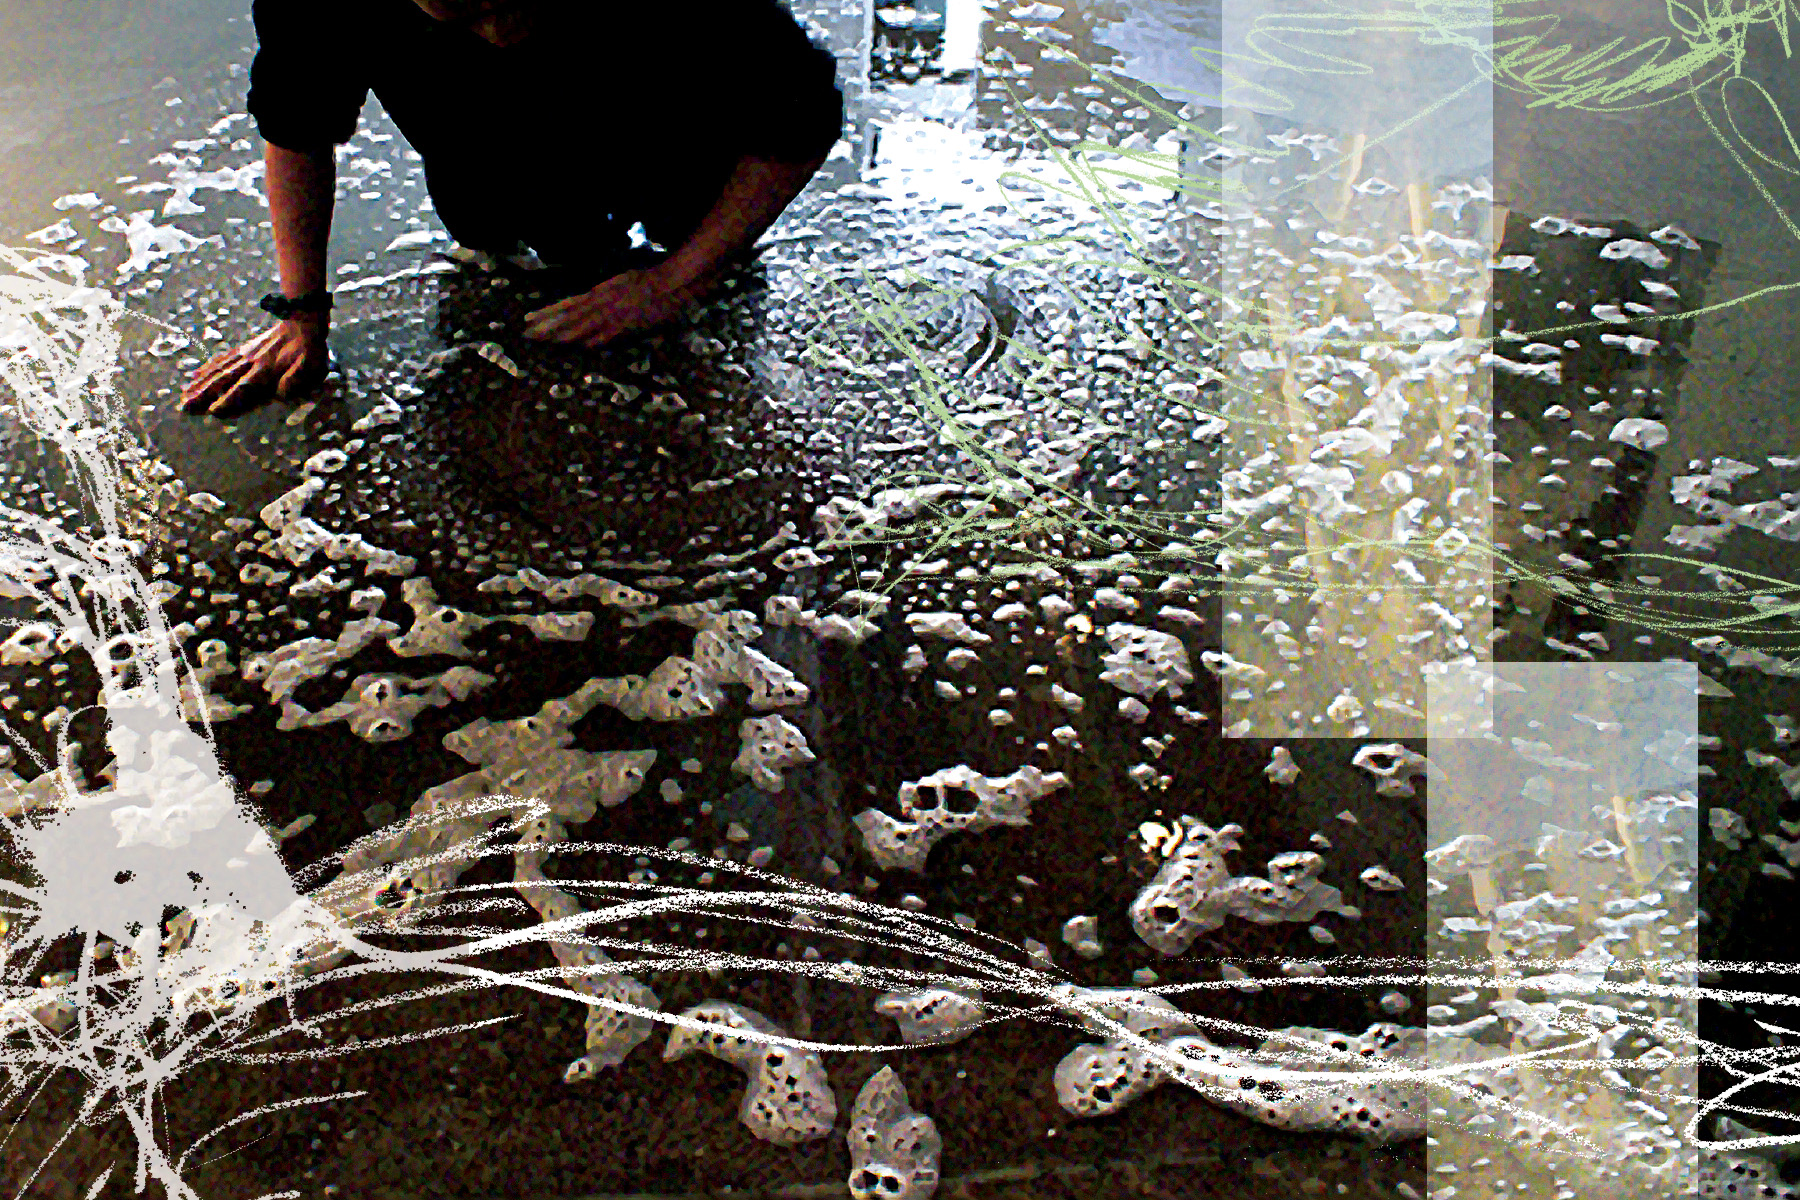 Digitial collage of a person on their knees on a soapy floor with lines rendered digitally on top of the image.